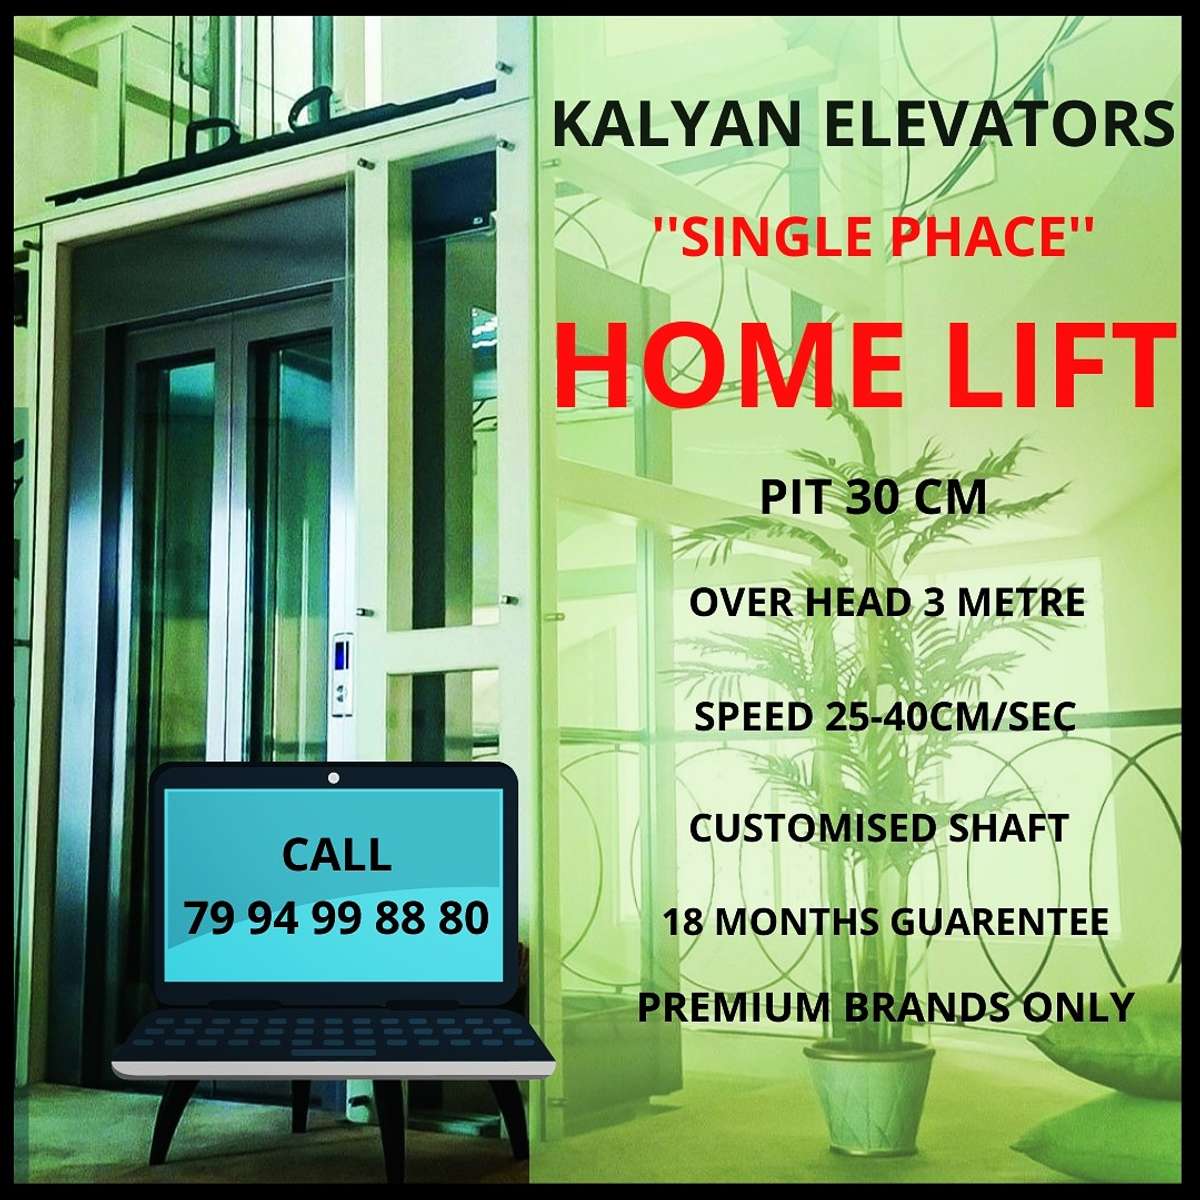 Kalyan Home Elevators offers the long-awaited solution to vertical mobility within homes at affordable prices and easy-to-use features. Our customized and aesthetically designed home lifts are easily installable in preexisting homes as well as houses under construction, and help you relieve the headache of climbing. More details:- call 

we do all kind of :-
Home Lifts
Hospital Lifts
Capsule Lifts
Commercial Lifts
Customised Passenger Lifts
Car Lifts
Parking Lifts